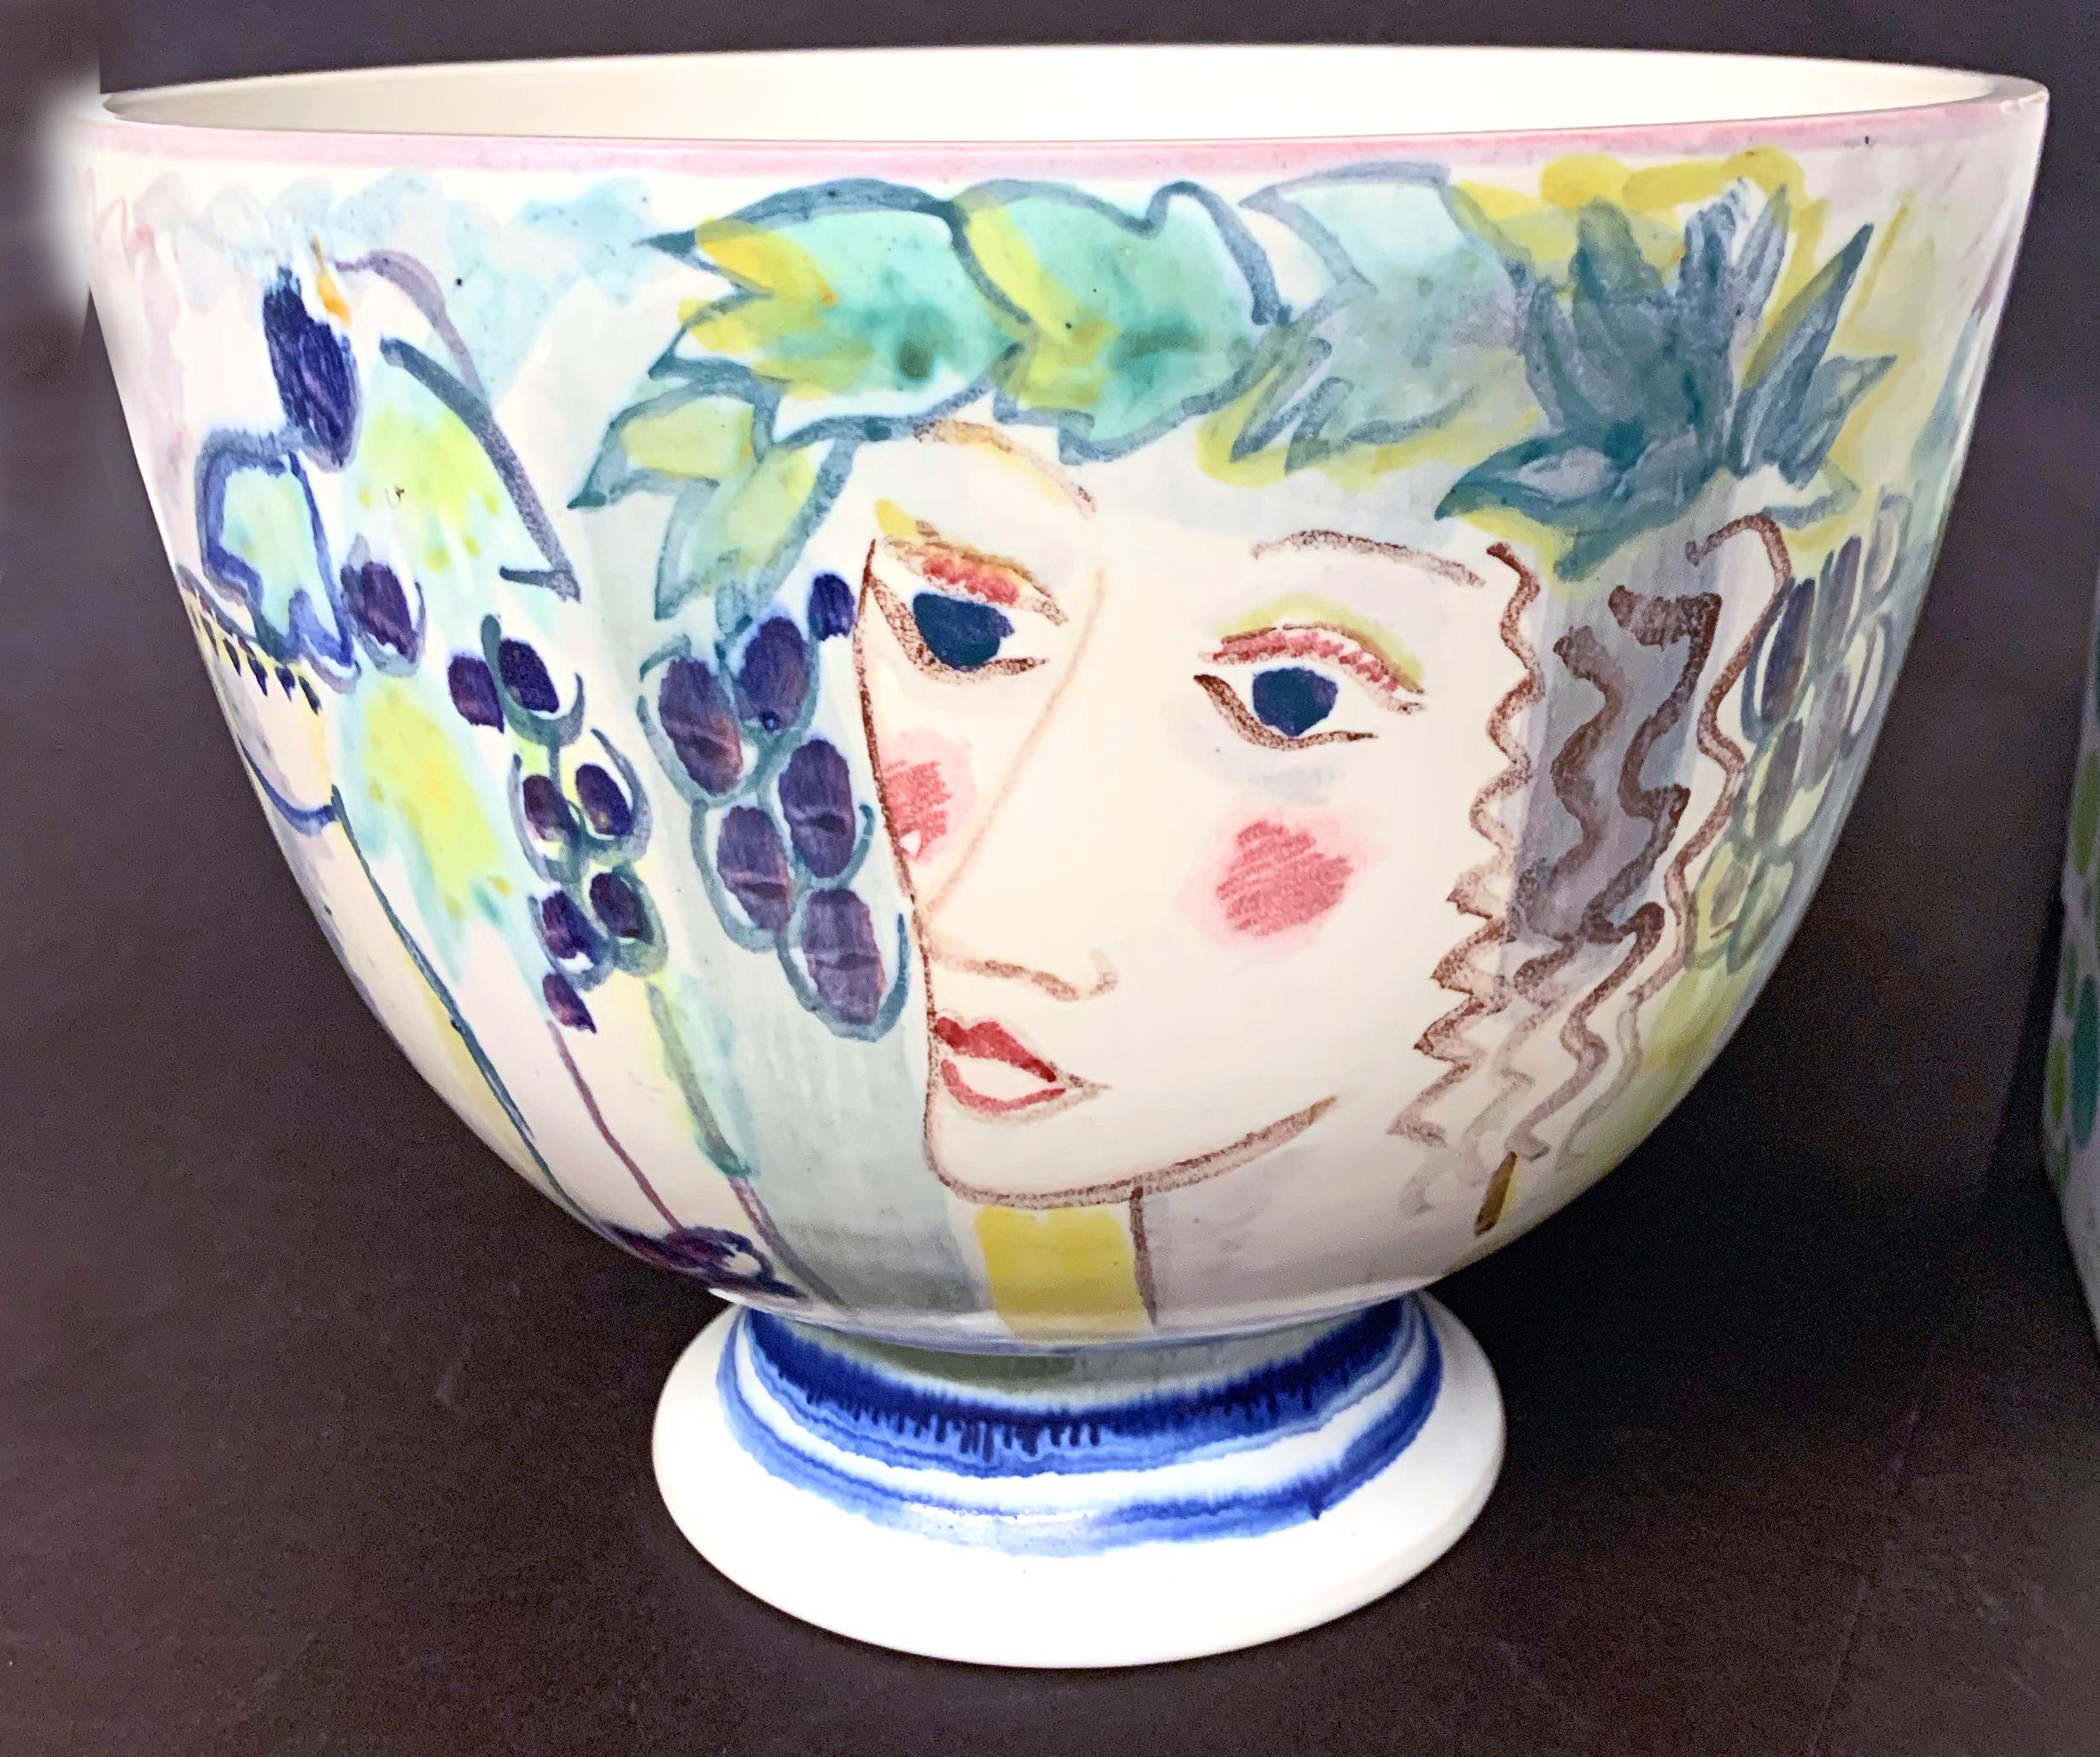 Brilliantly glazed in vivid shades of cerulean, lilac, rich yellow and purple, this punsch bowl decorated with Bacchus figures, grapes and pitchers of wine was designed and executed by Carl-Harry Stalhane, one of the wunderkinds of 1940s Swedish